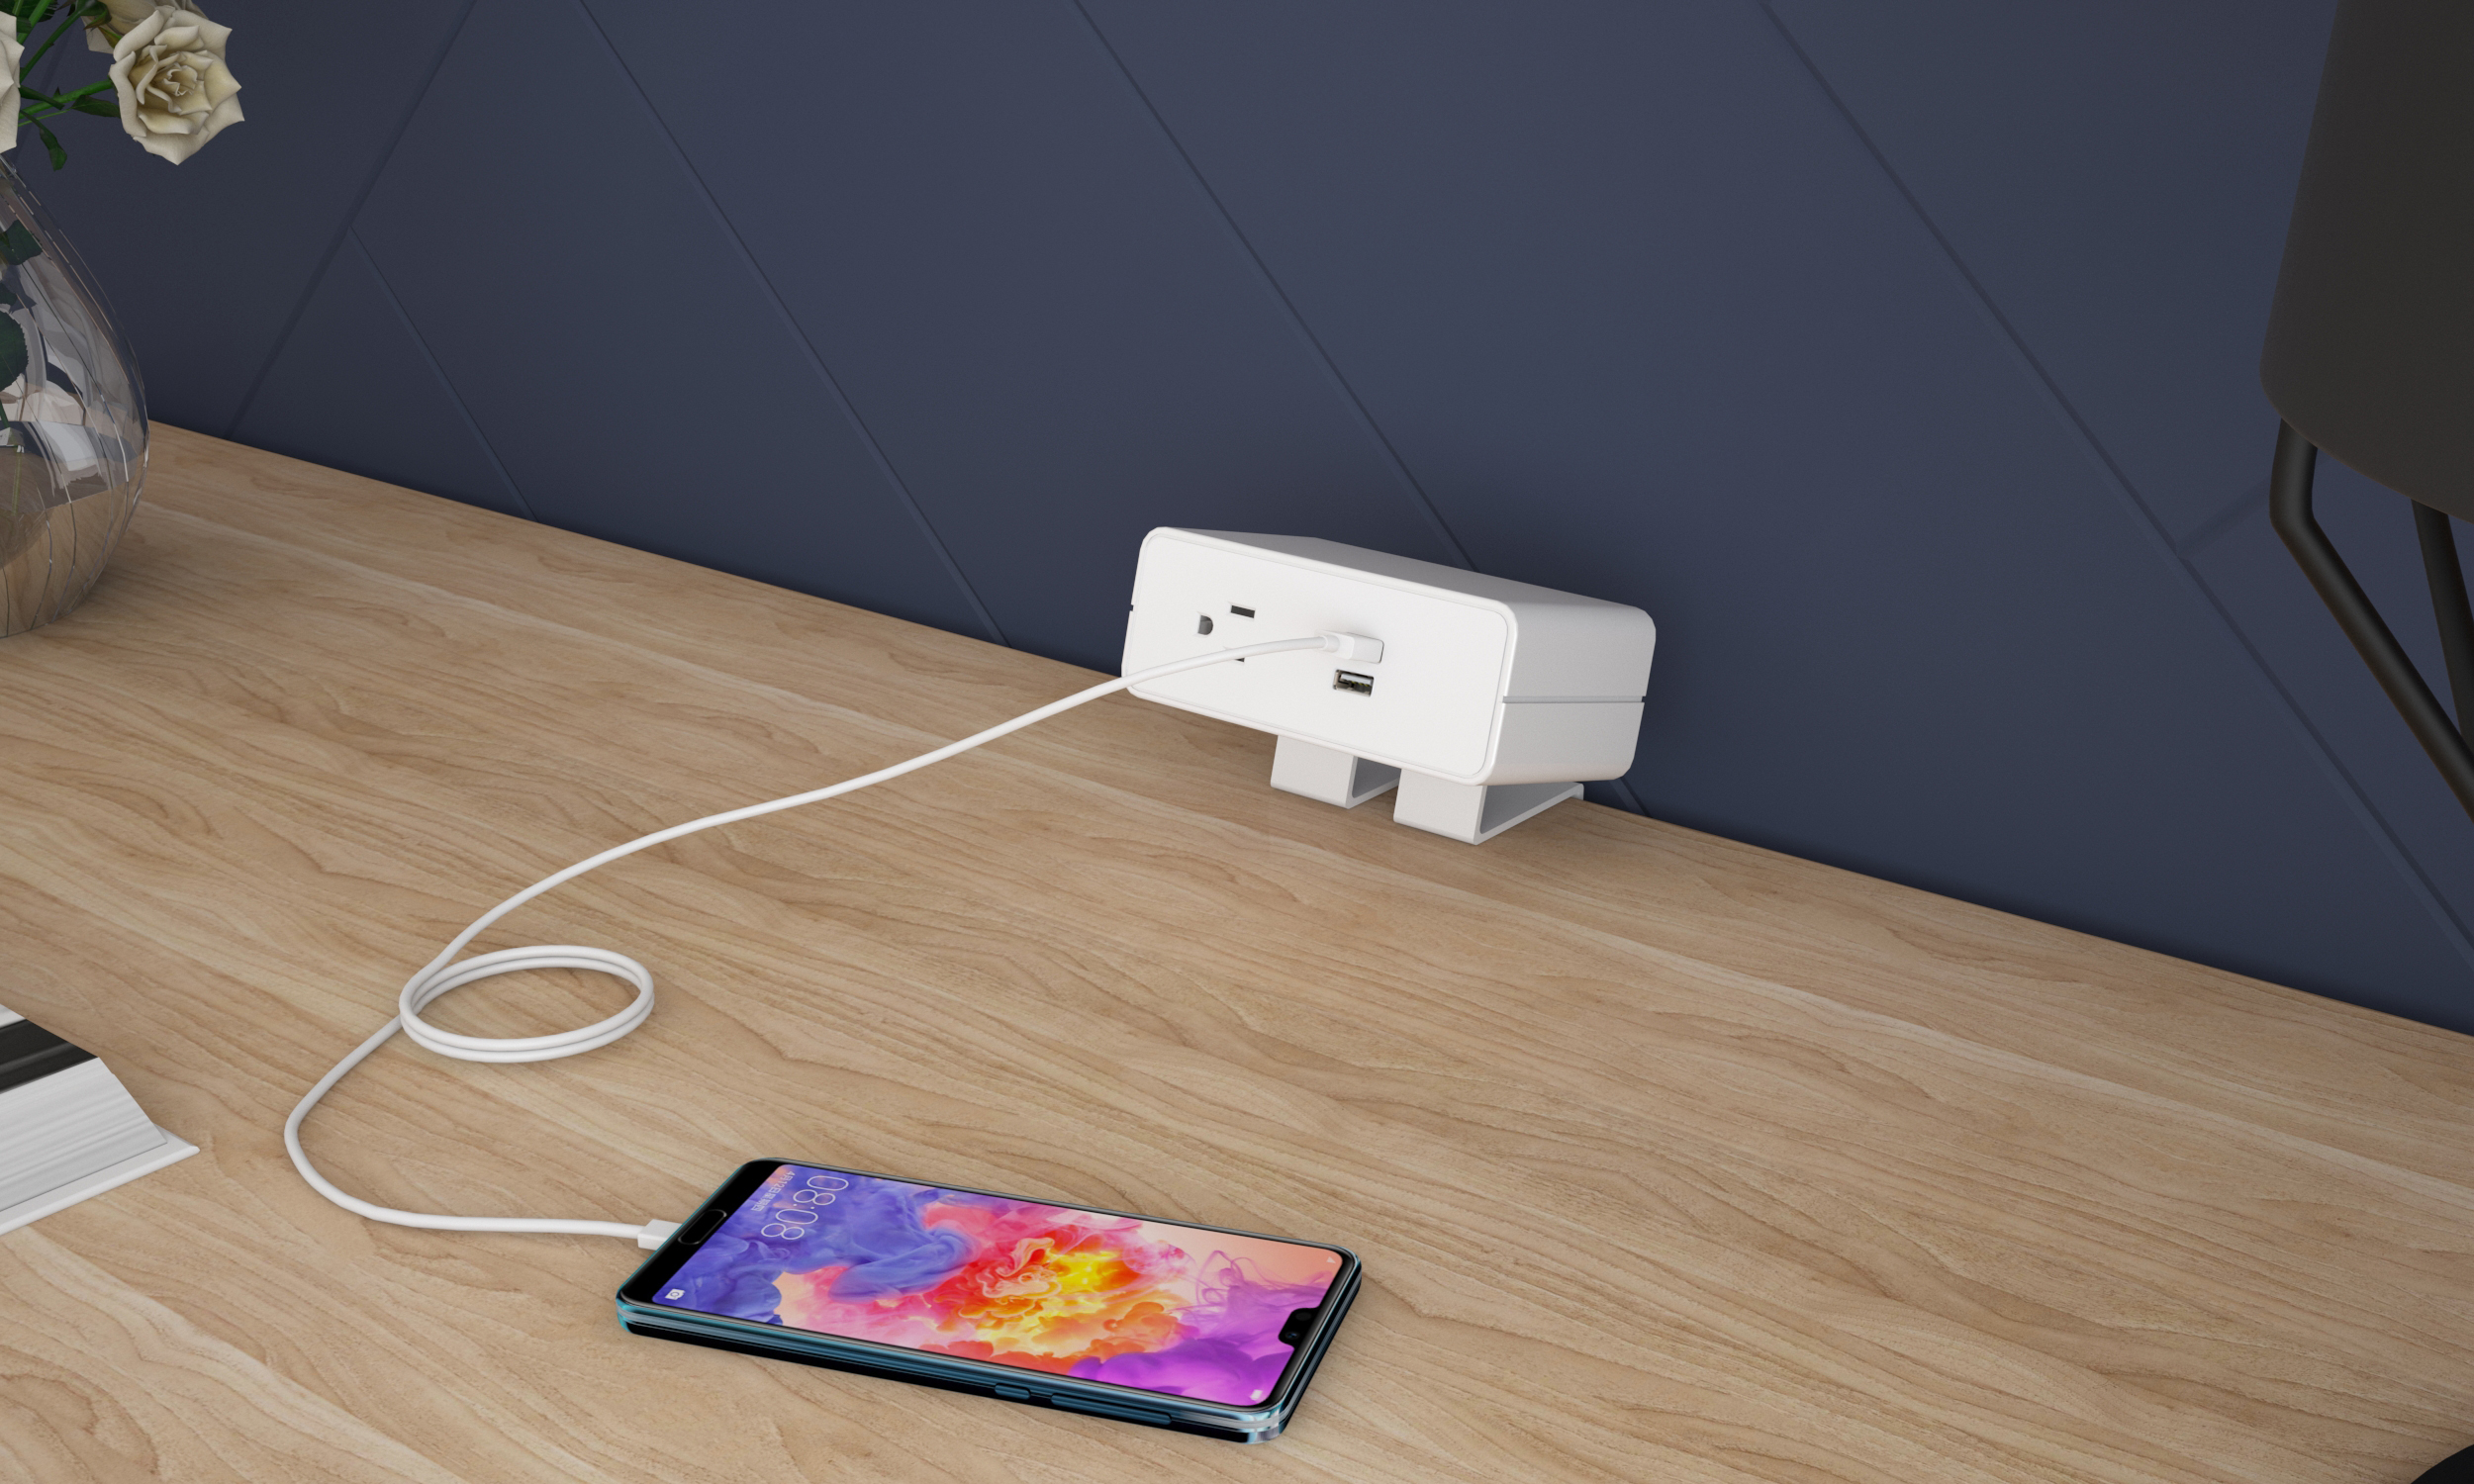 Why Choose Power Sockets with USB Ports for Your Office?